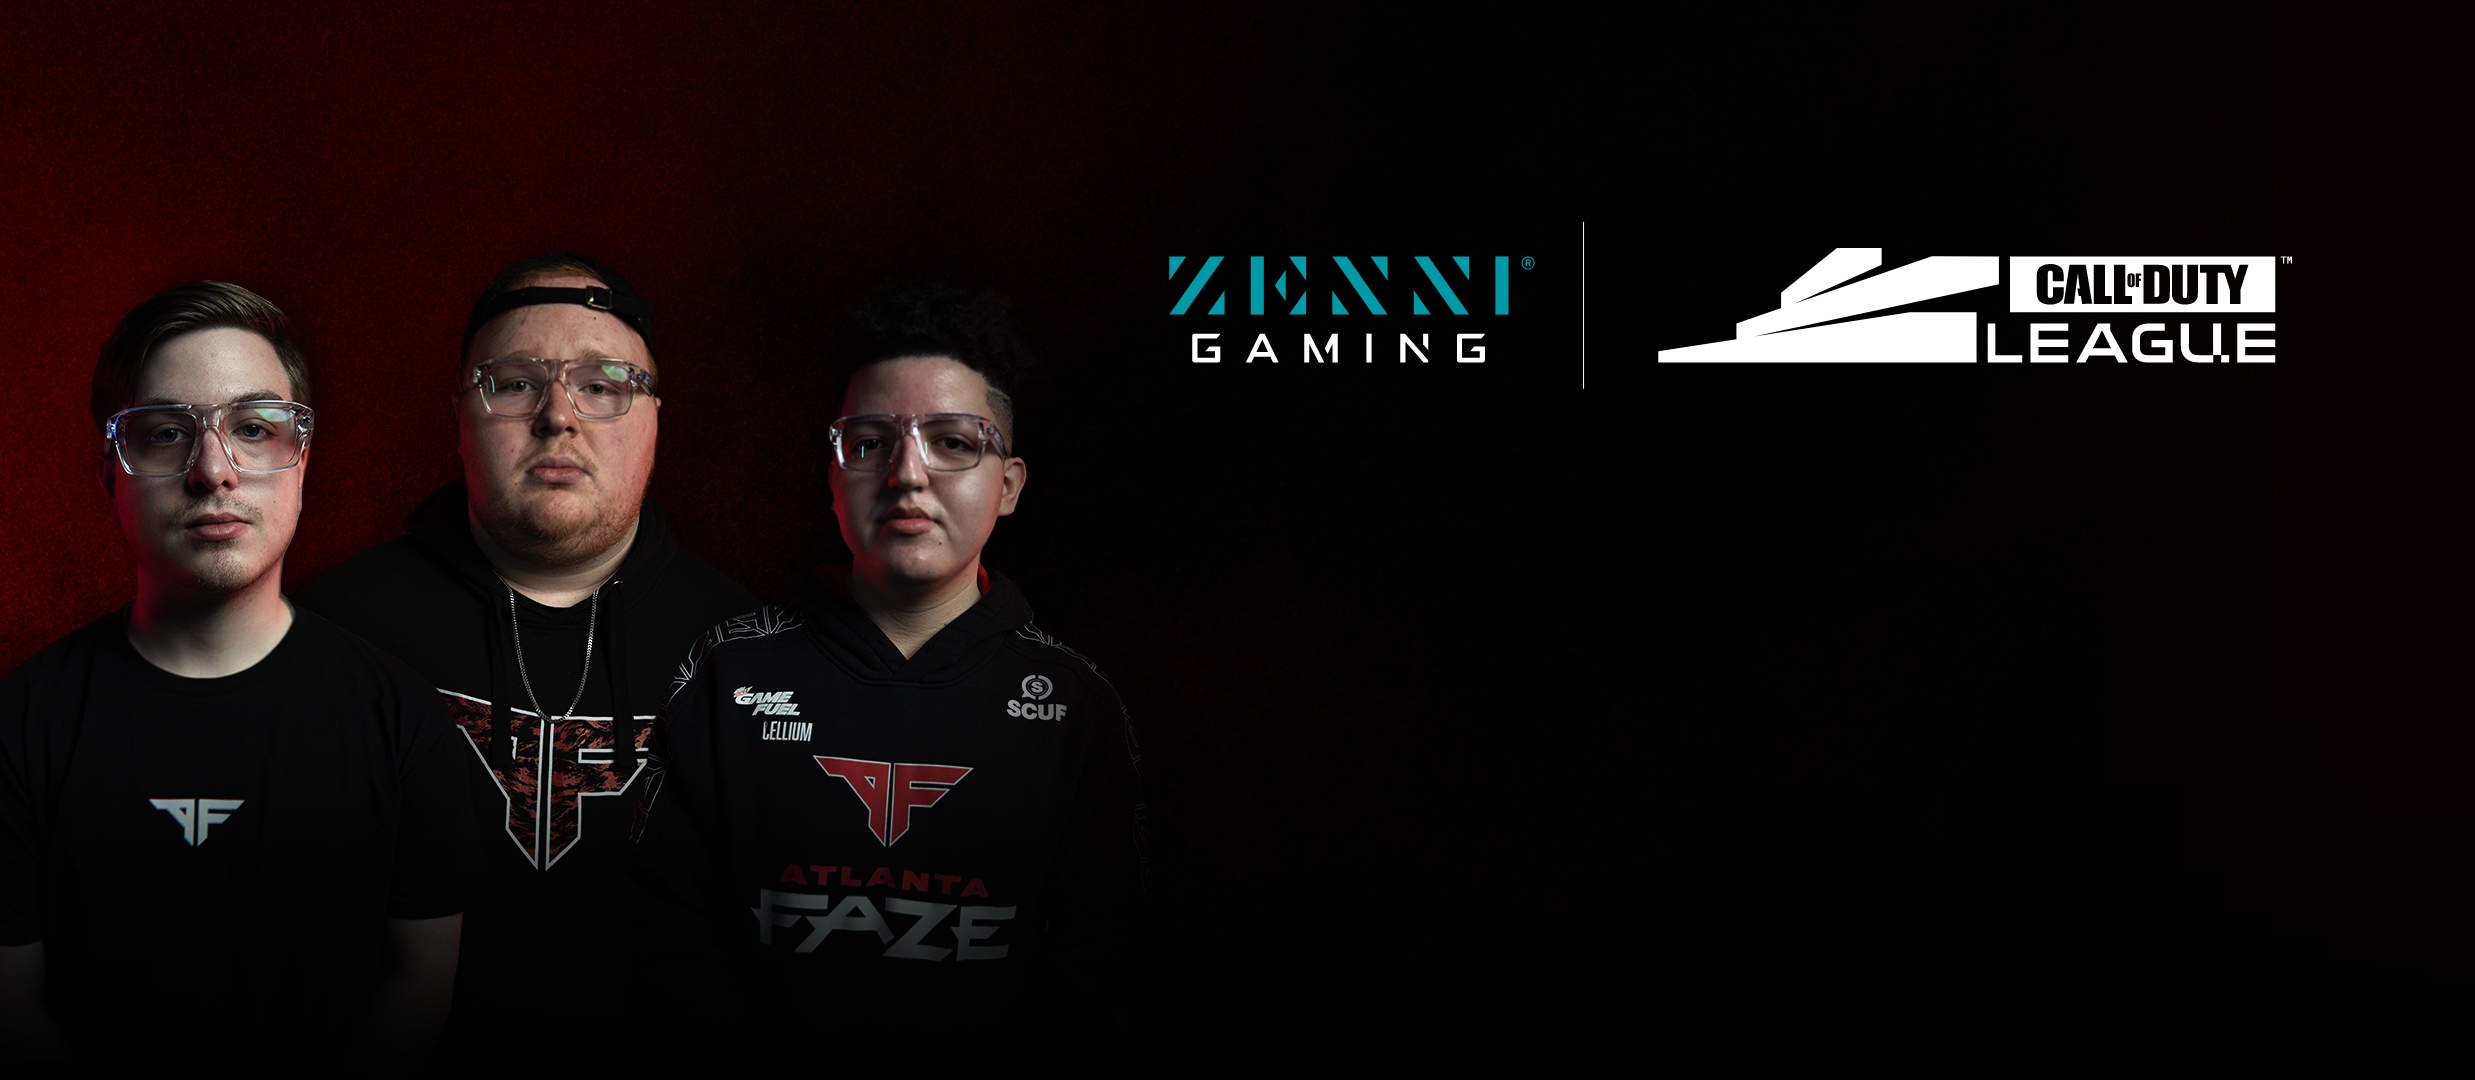 Call of Duty League and Zenni gaming. Image of three members of the Call of Duty League esports team Atlanta FaZe wearing Zenni x CDL clear square glasses #84448723.